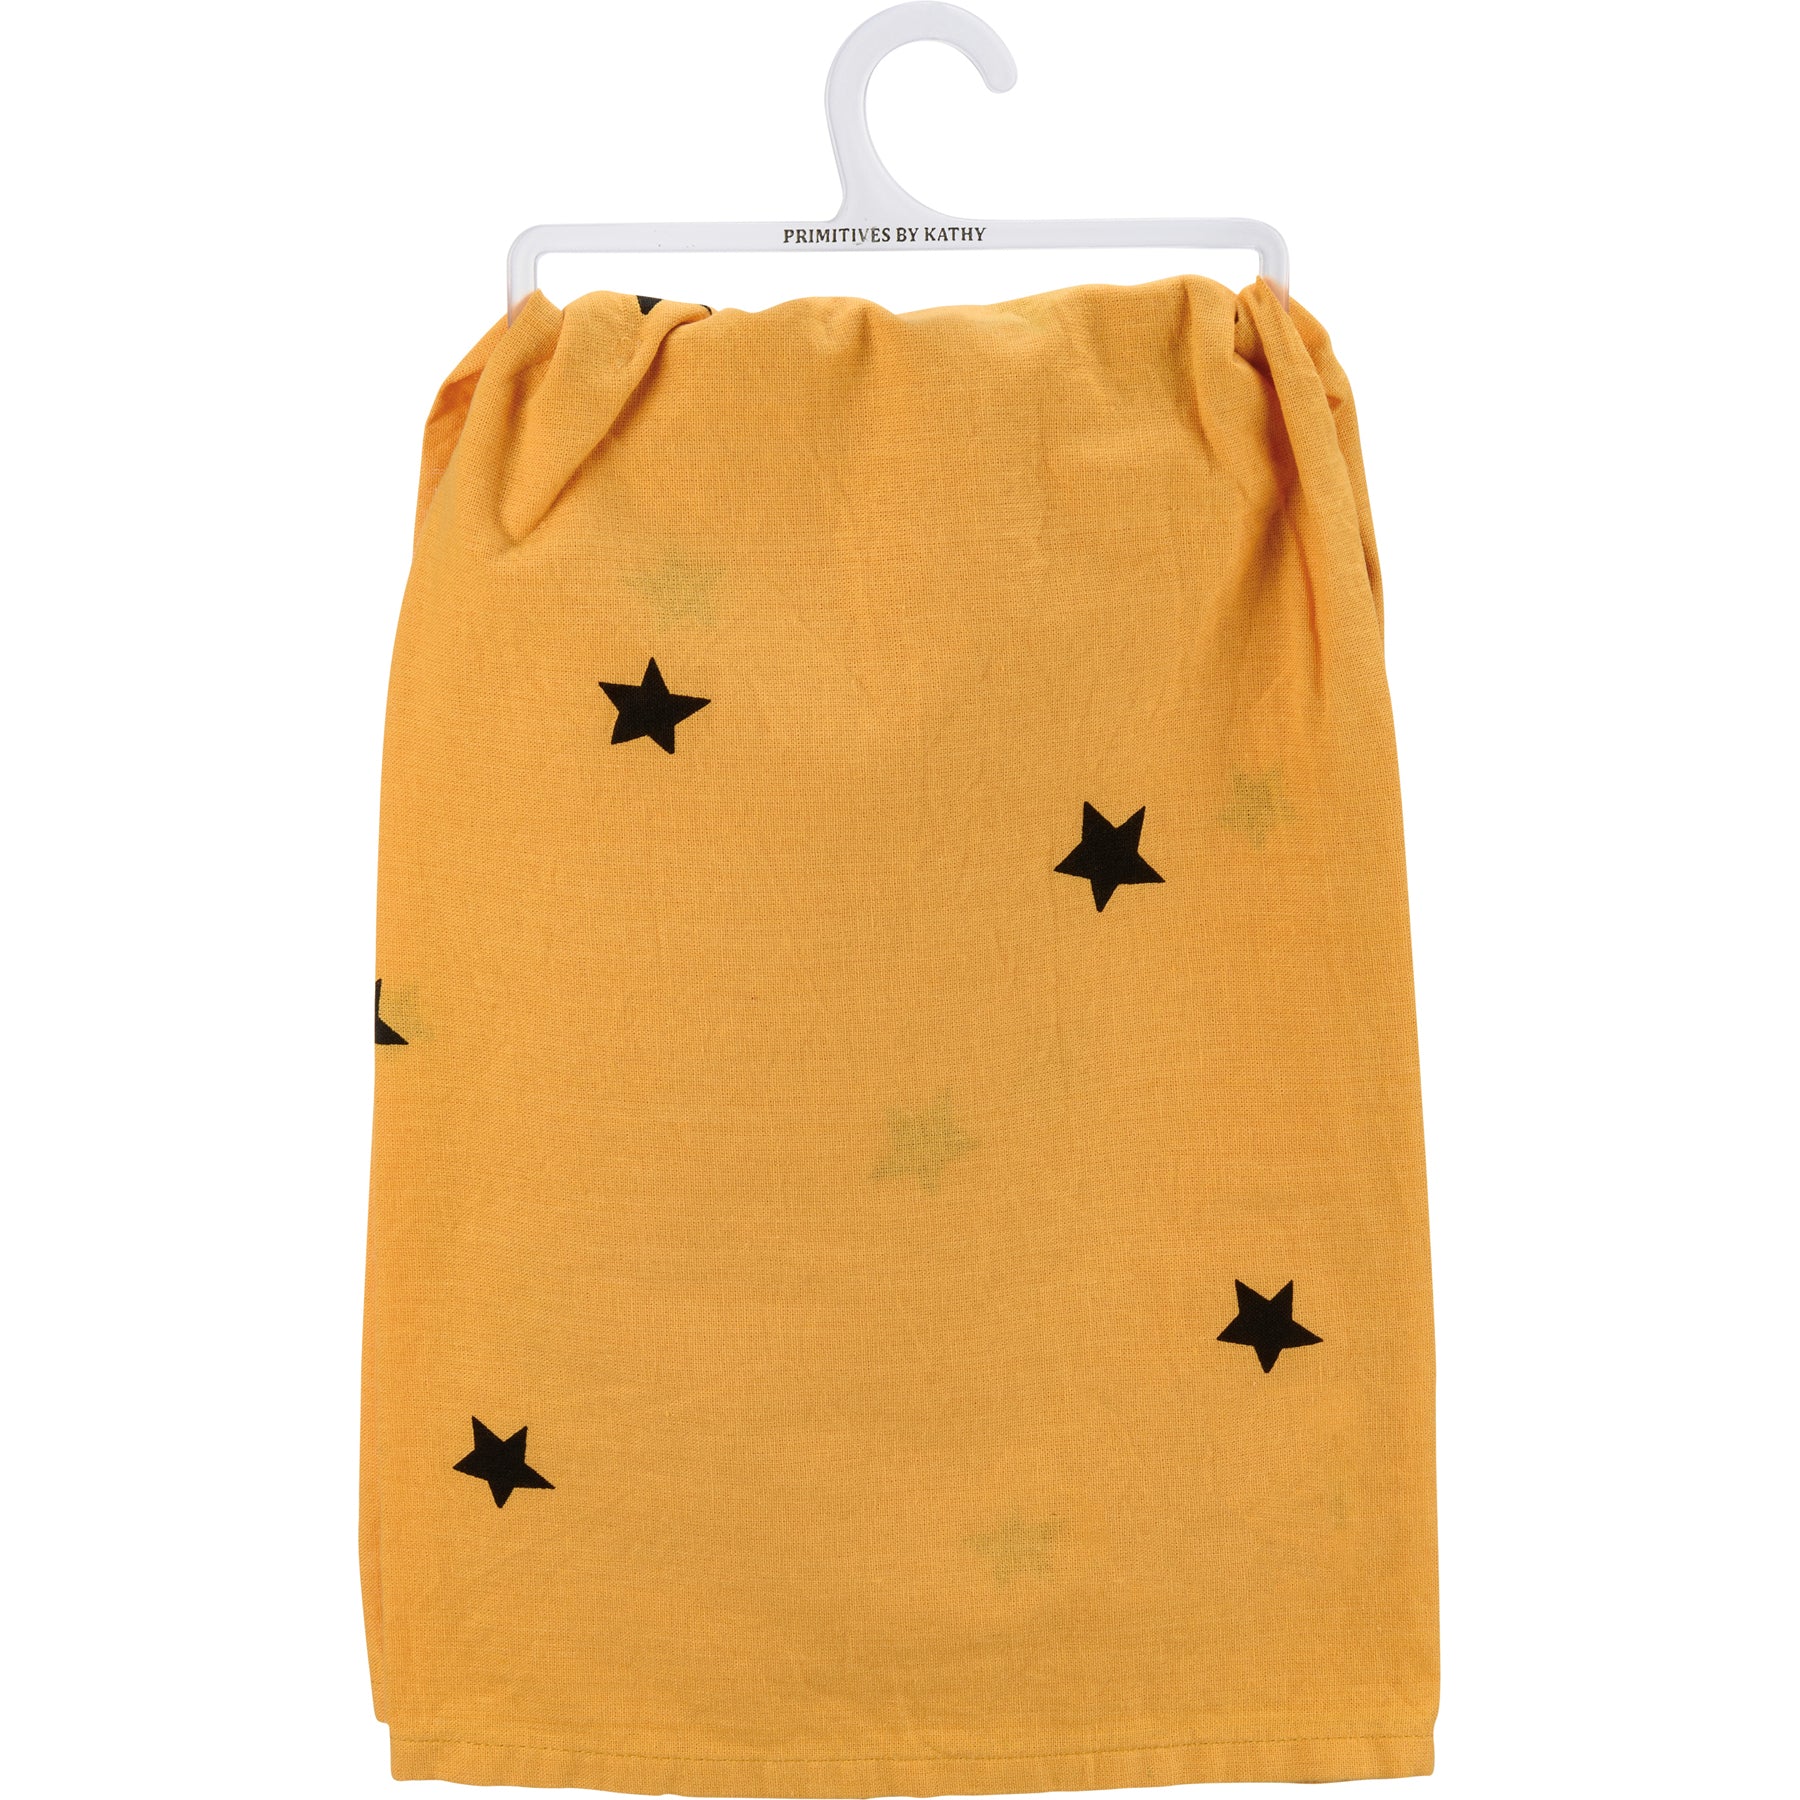 Kitchen towel showcasing a comical cat and dog in Halloween attire on a black star print motif.